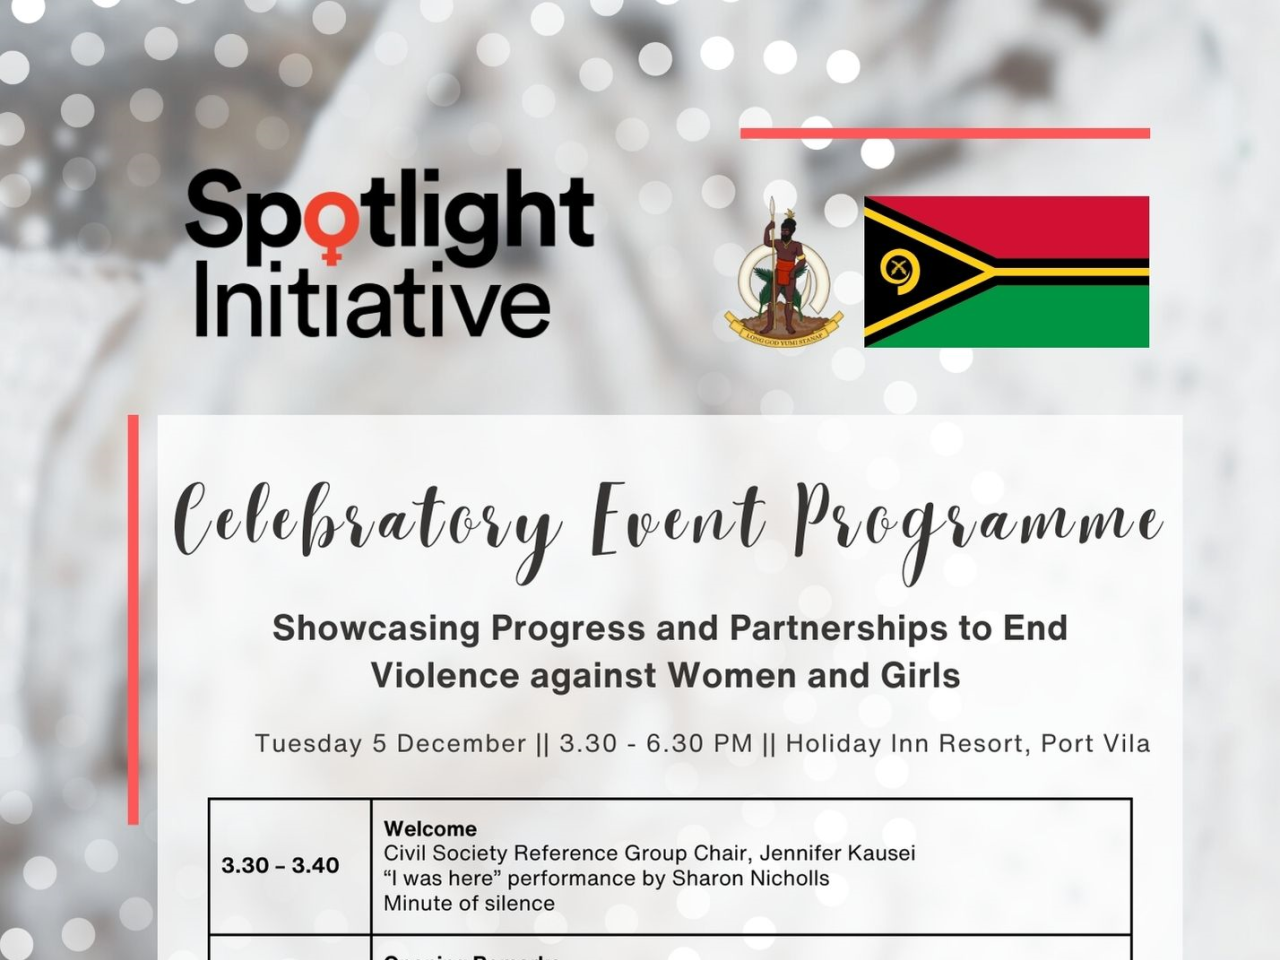 The image include the logos of Vanuatu flag and coat of arms and the programme of the event.